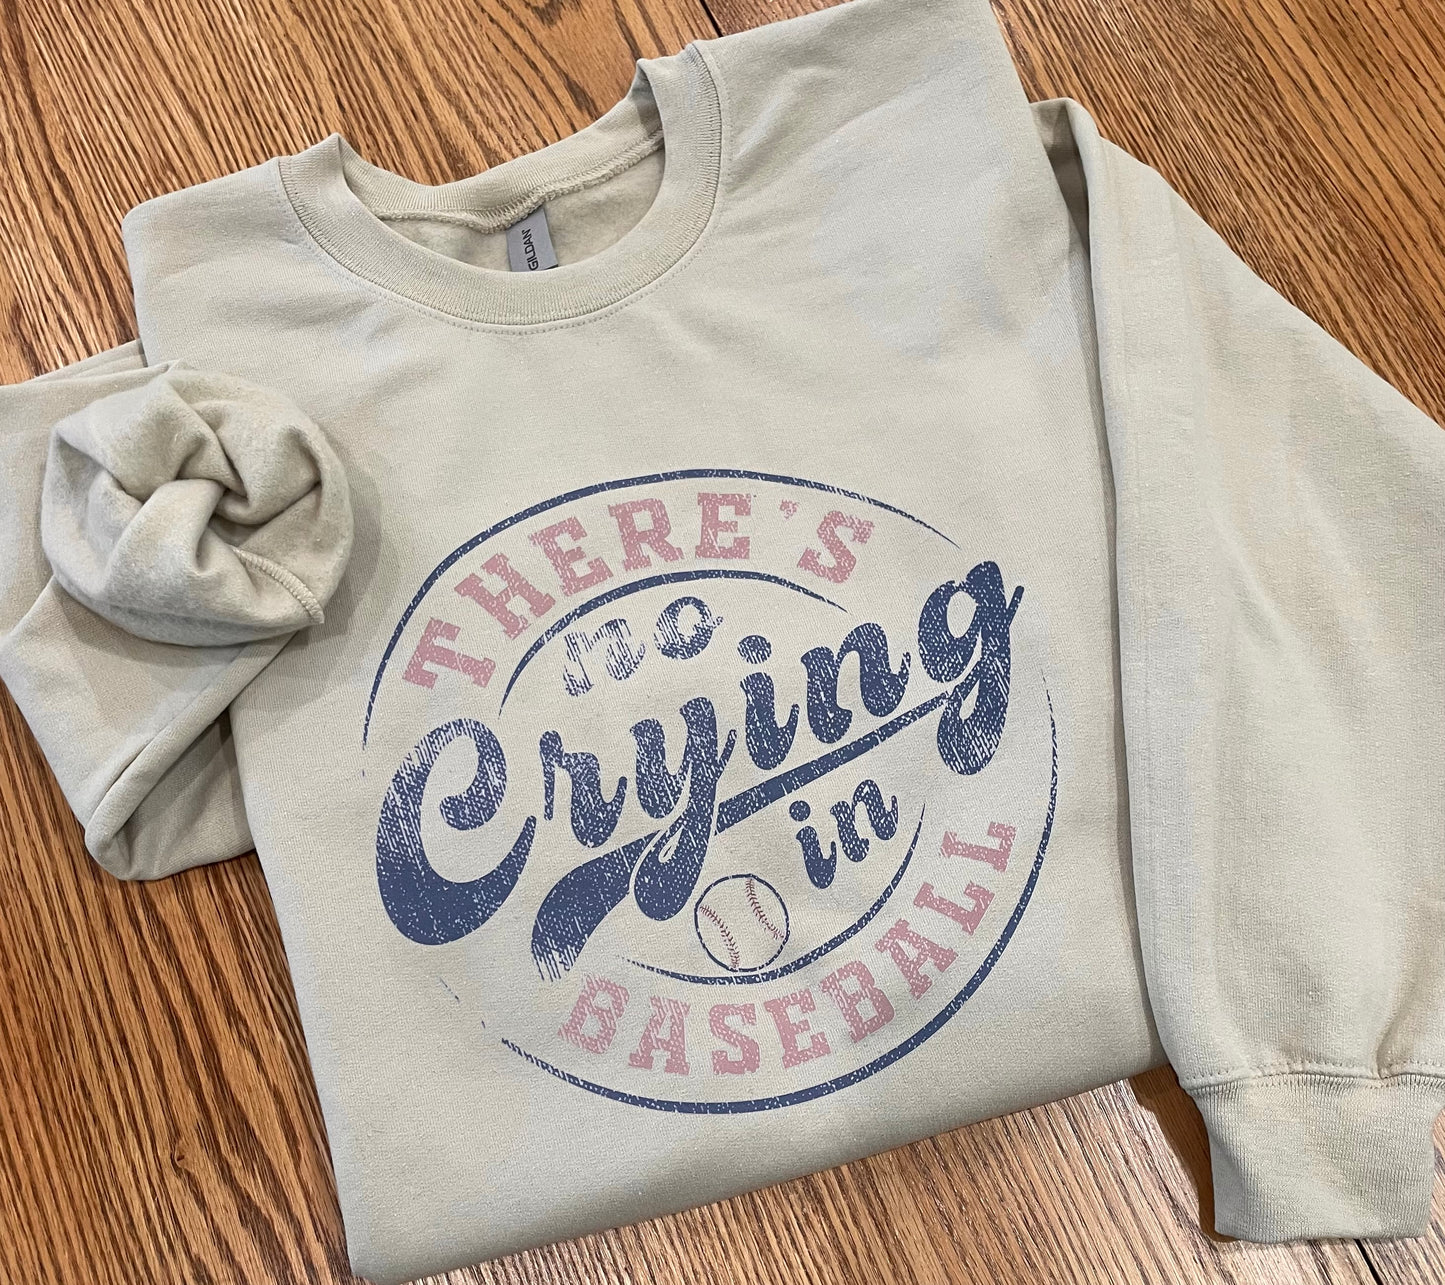 There's No Crying in Baseball Heavy Blend™ Adult Crewneck Sweatshirt